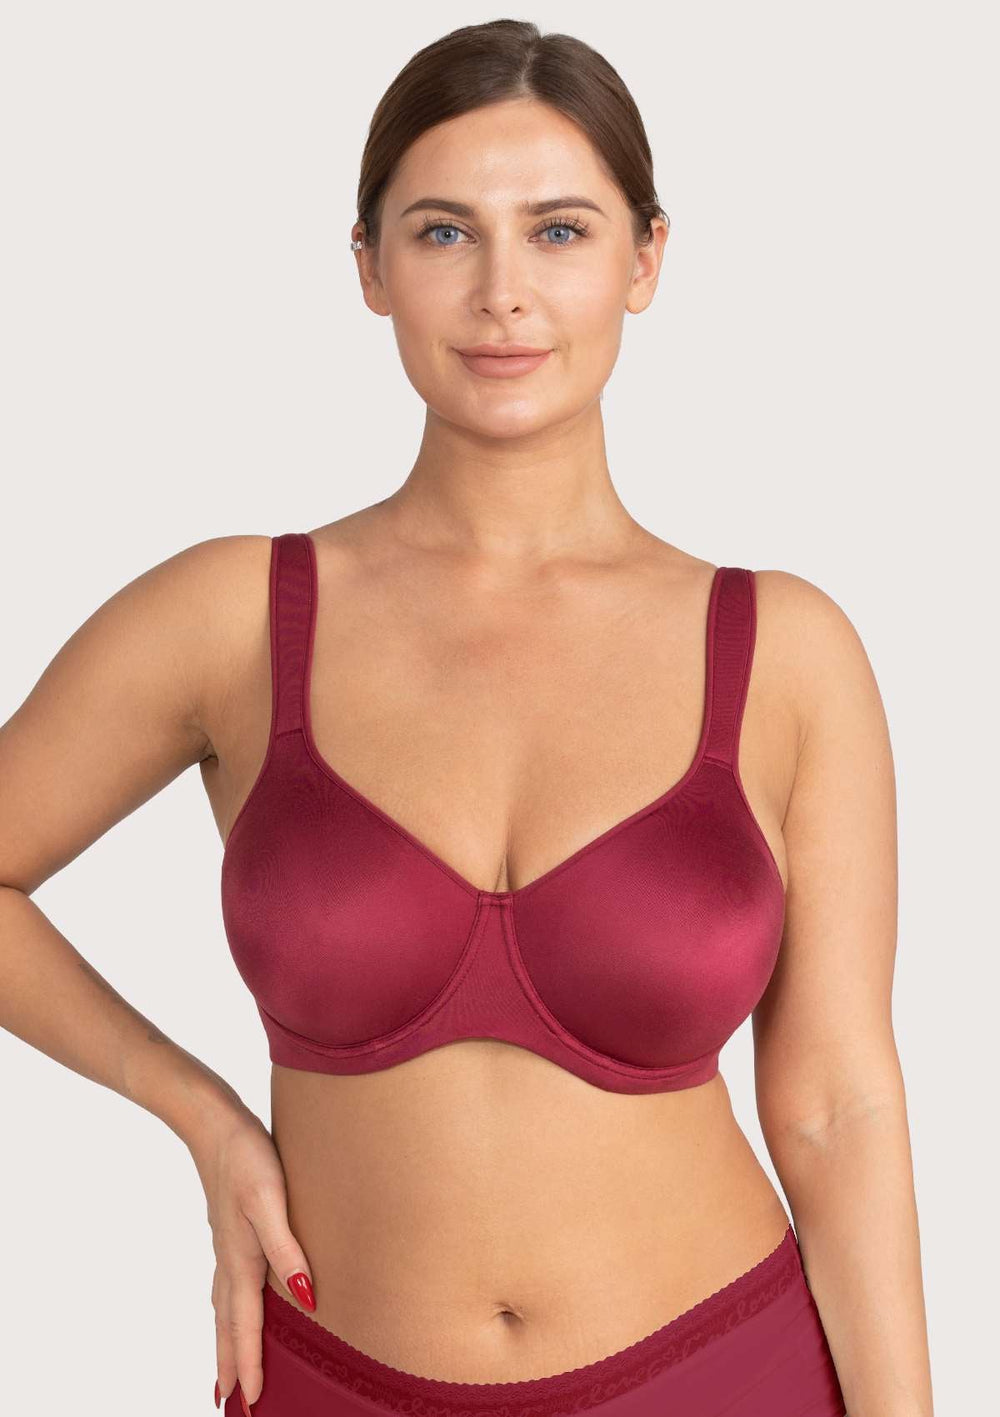 Red Unlined Full Coverage Bra